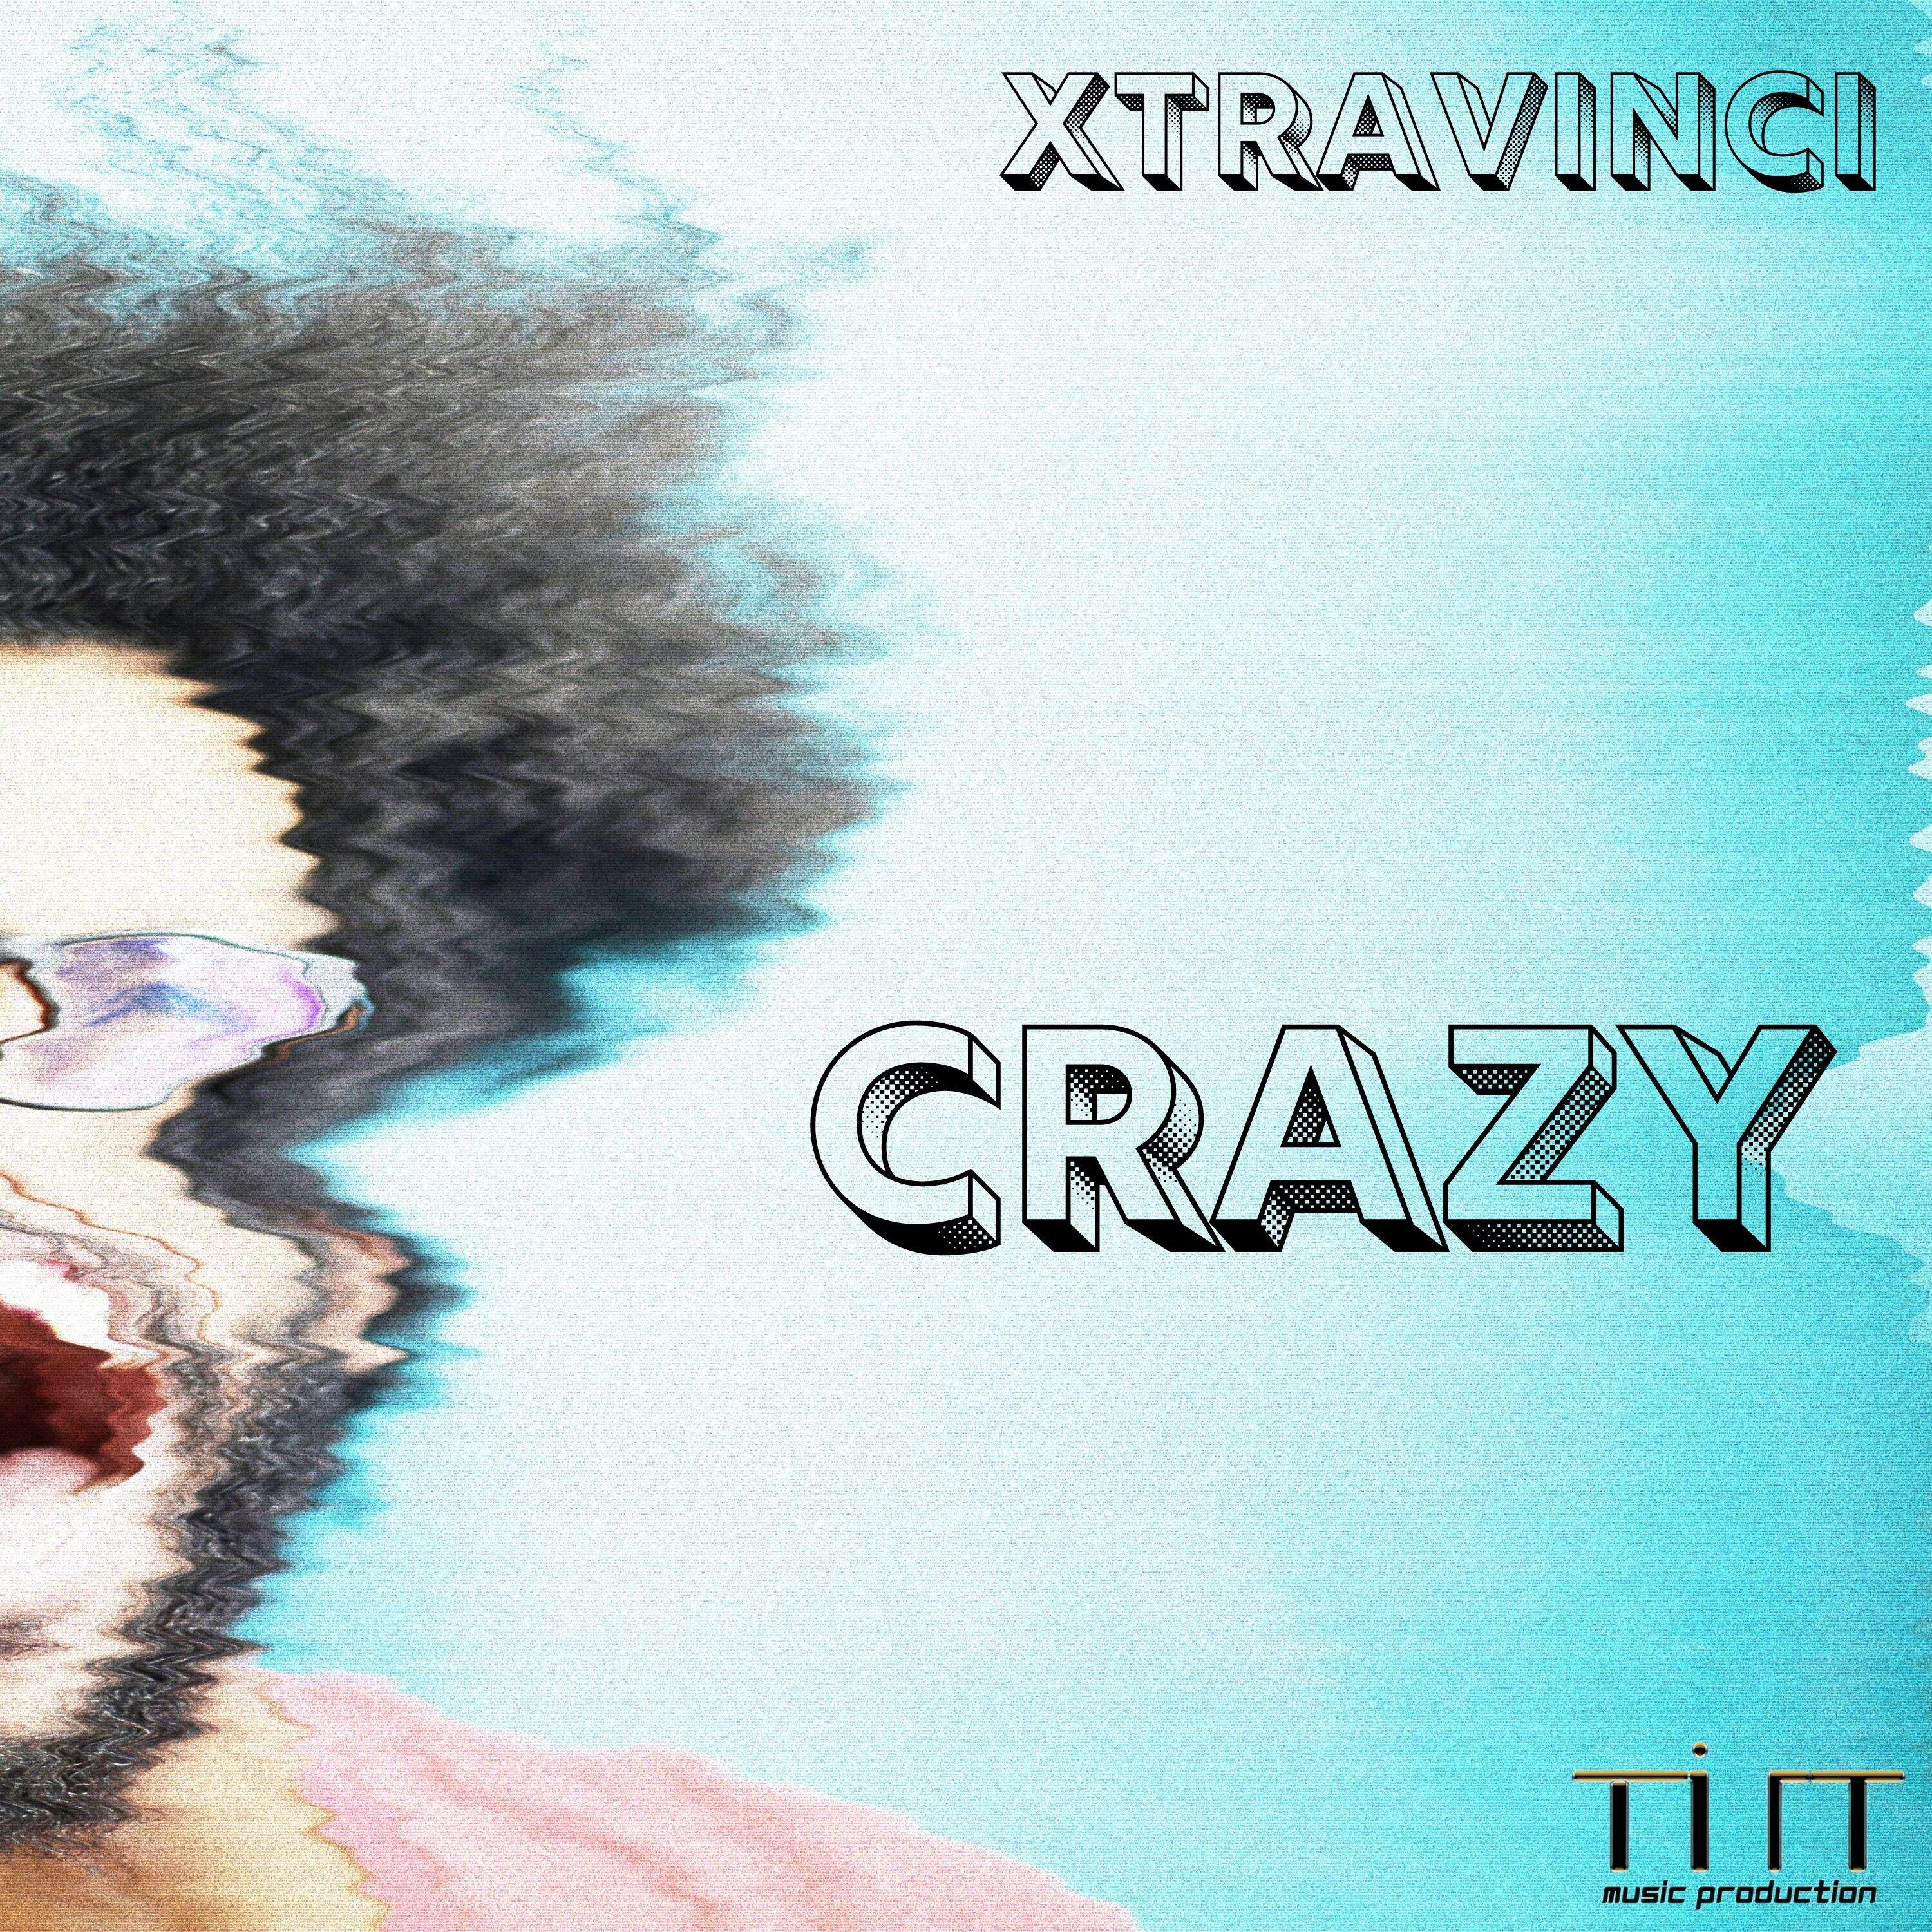 CRAZY is the new song performed by XTRAVINCI